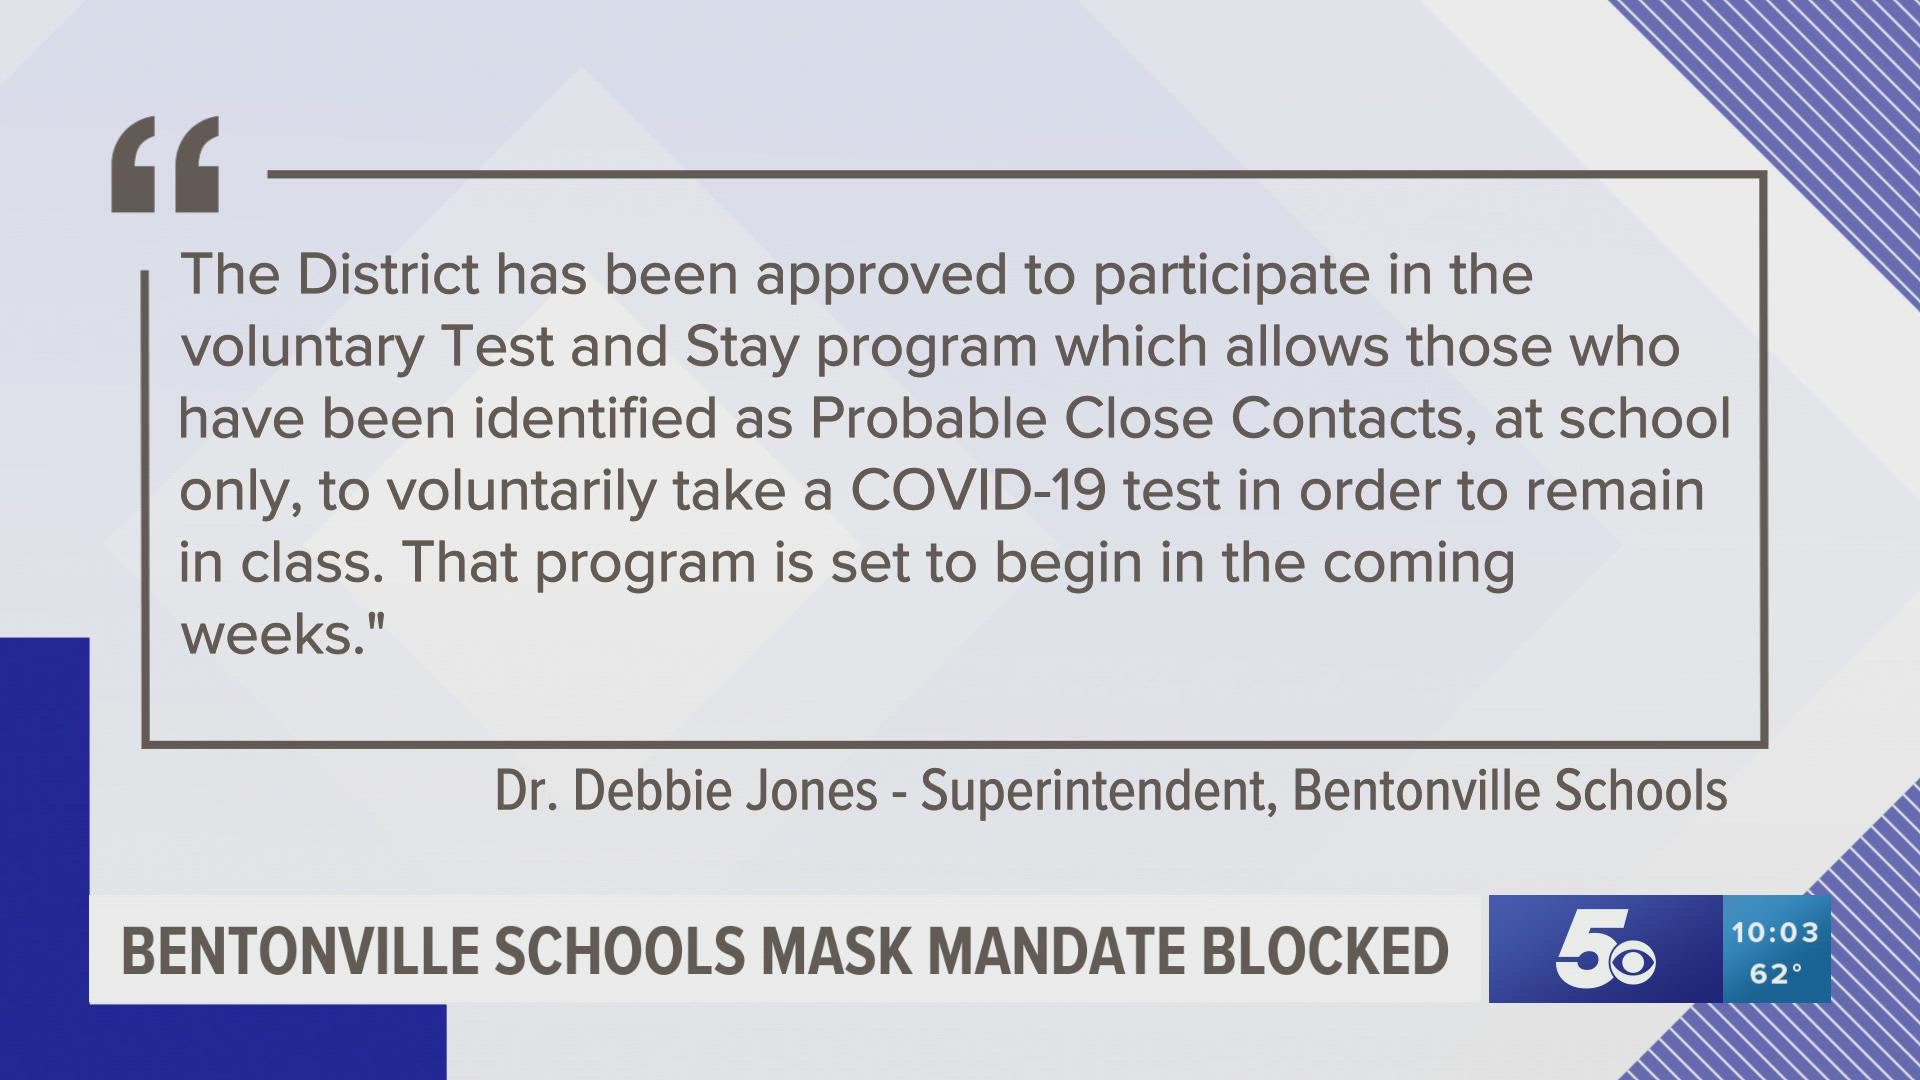 Students and staff will no longer be required to wear face coverings while inside Bentonville public schools until further order from the court.